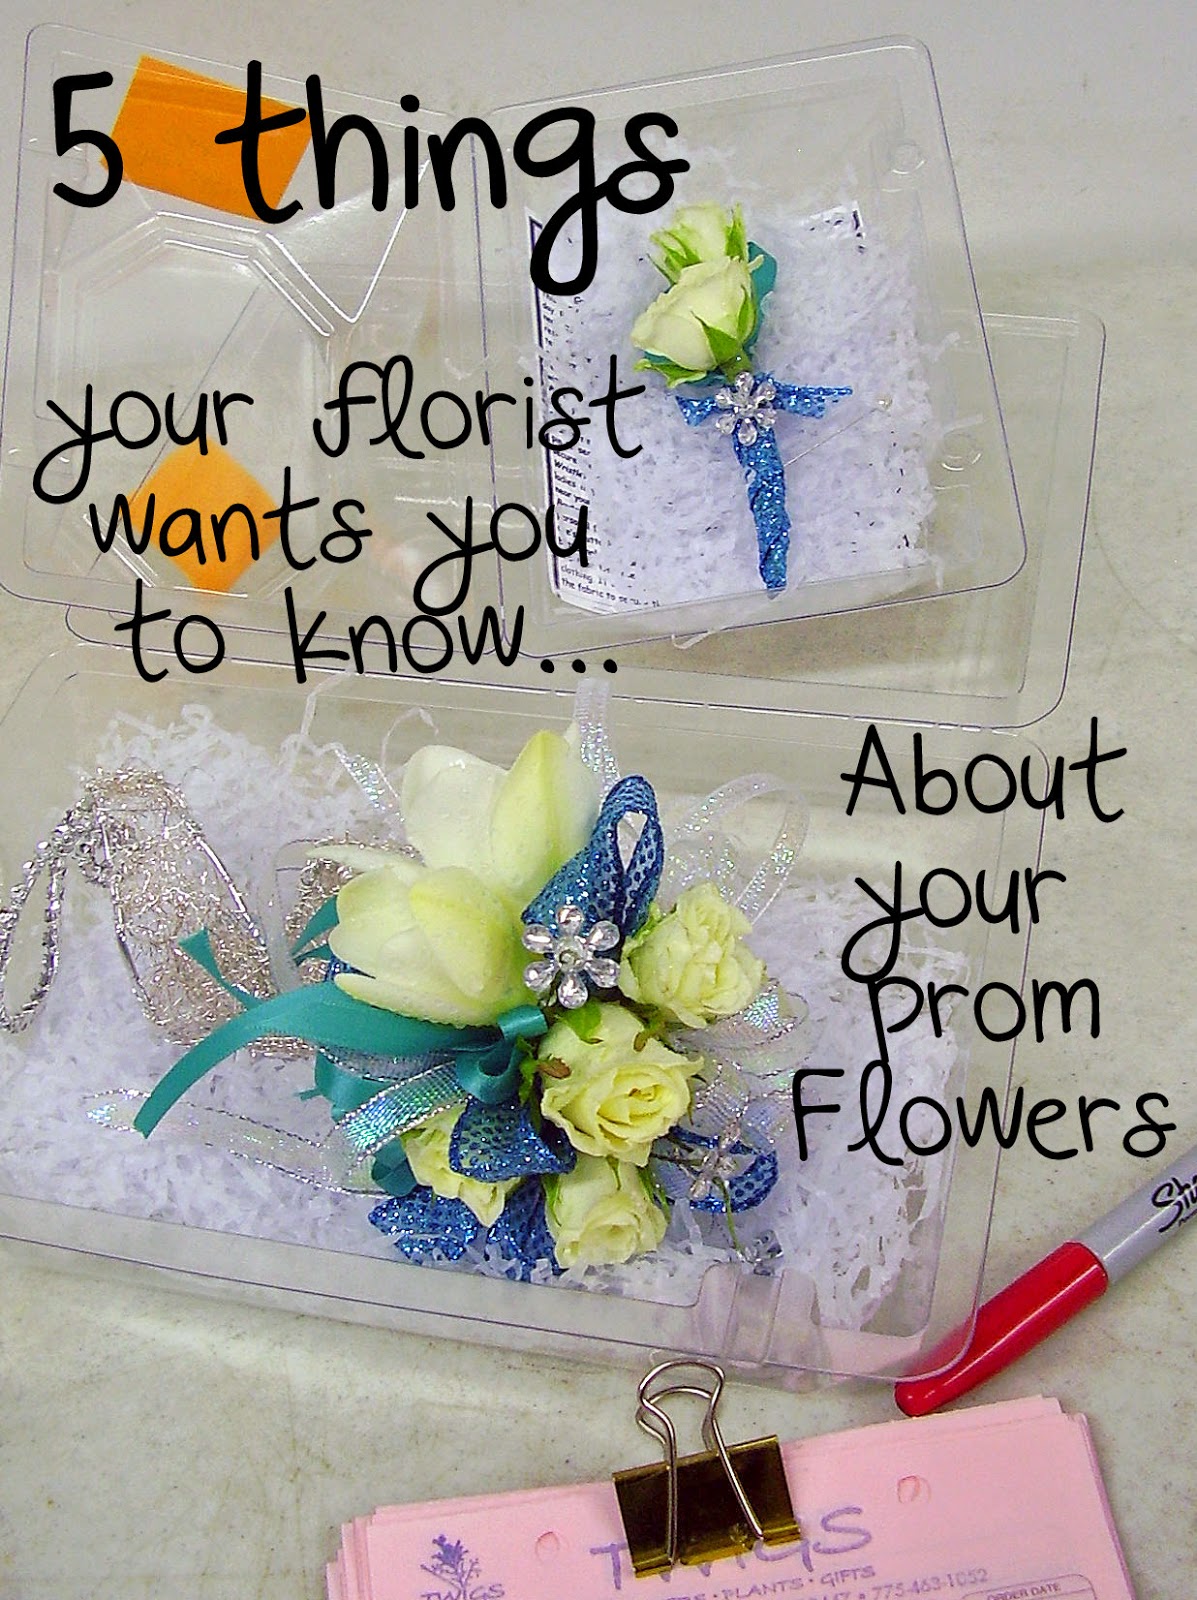 5 things your florist wants you to know..#Prom #PromFlowersBlog